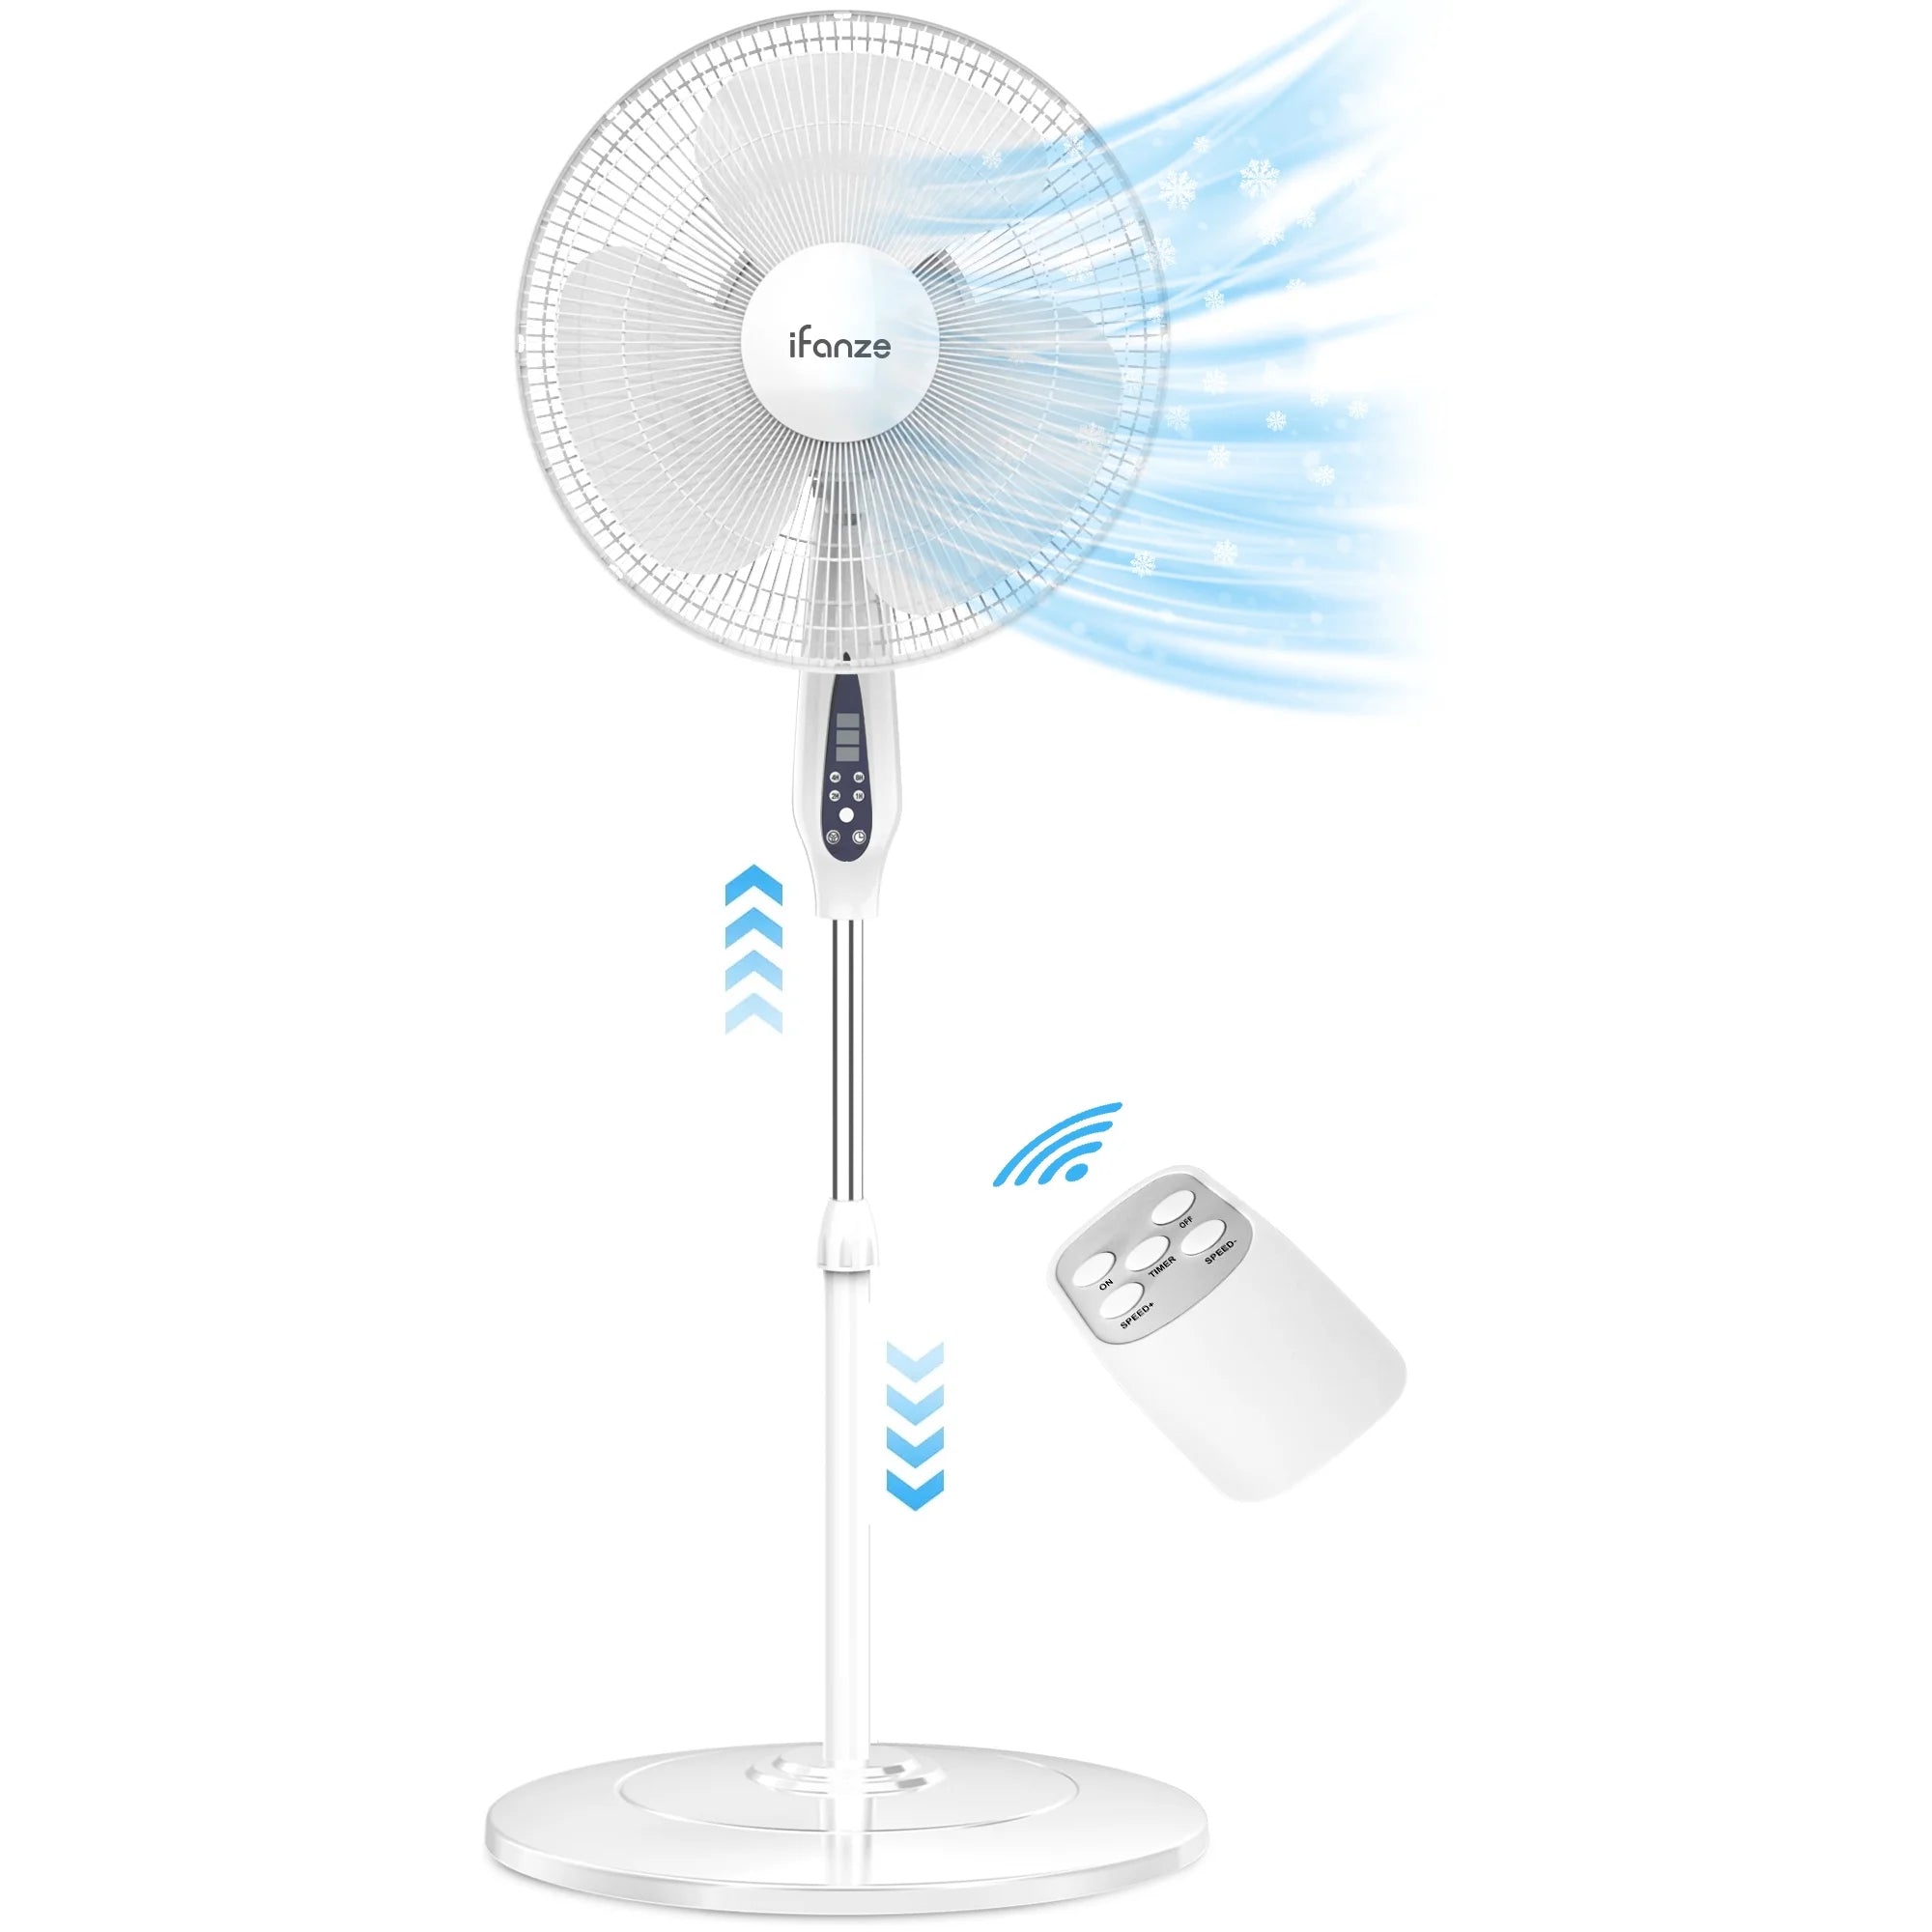 16" Adjustable Oscillating DC Standing Fan with Remote